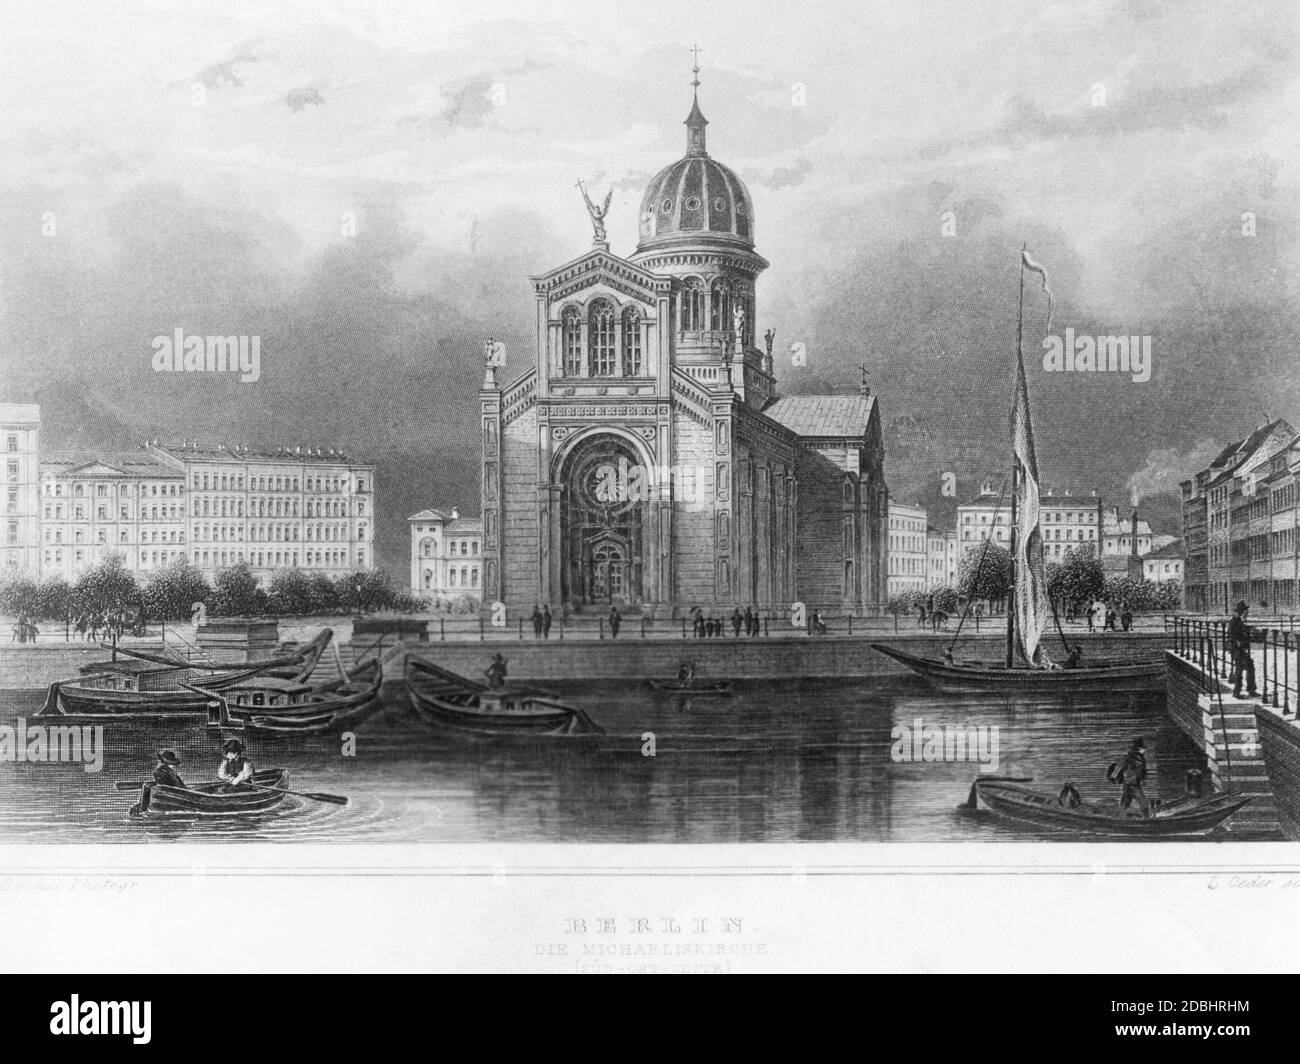 The engraving from 1854 shows the St. Michael Church at Michaelkirchplatz in Berlin-Mitte. In front of it there are boats in Engelbecken. Stock Photo